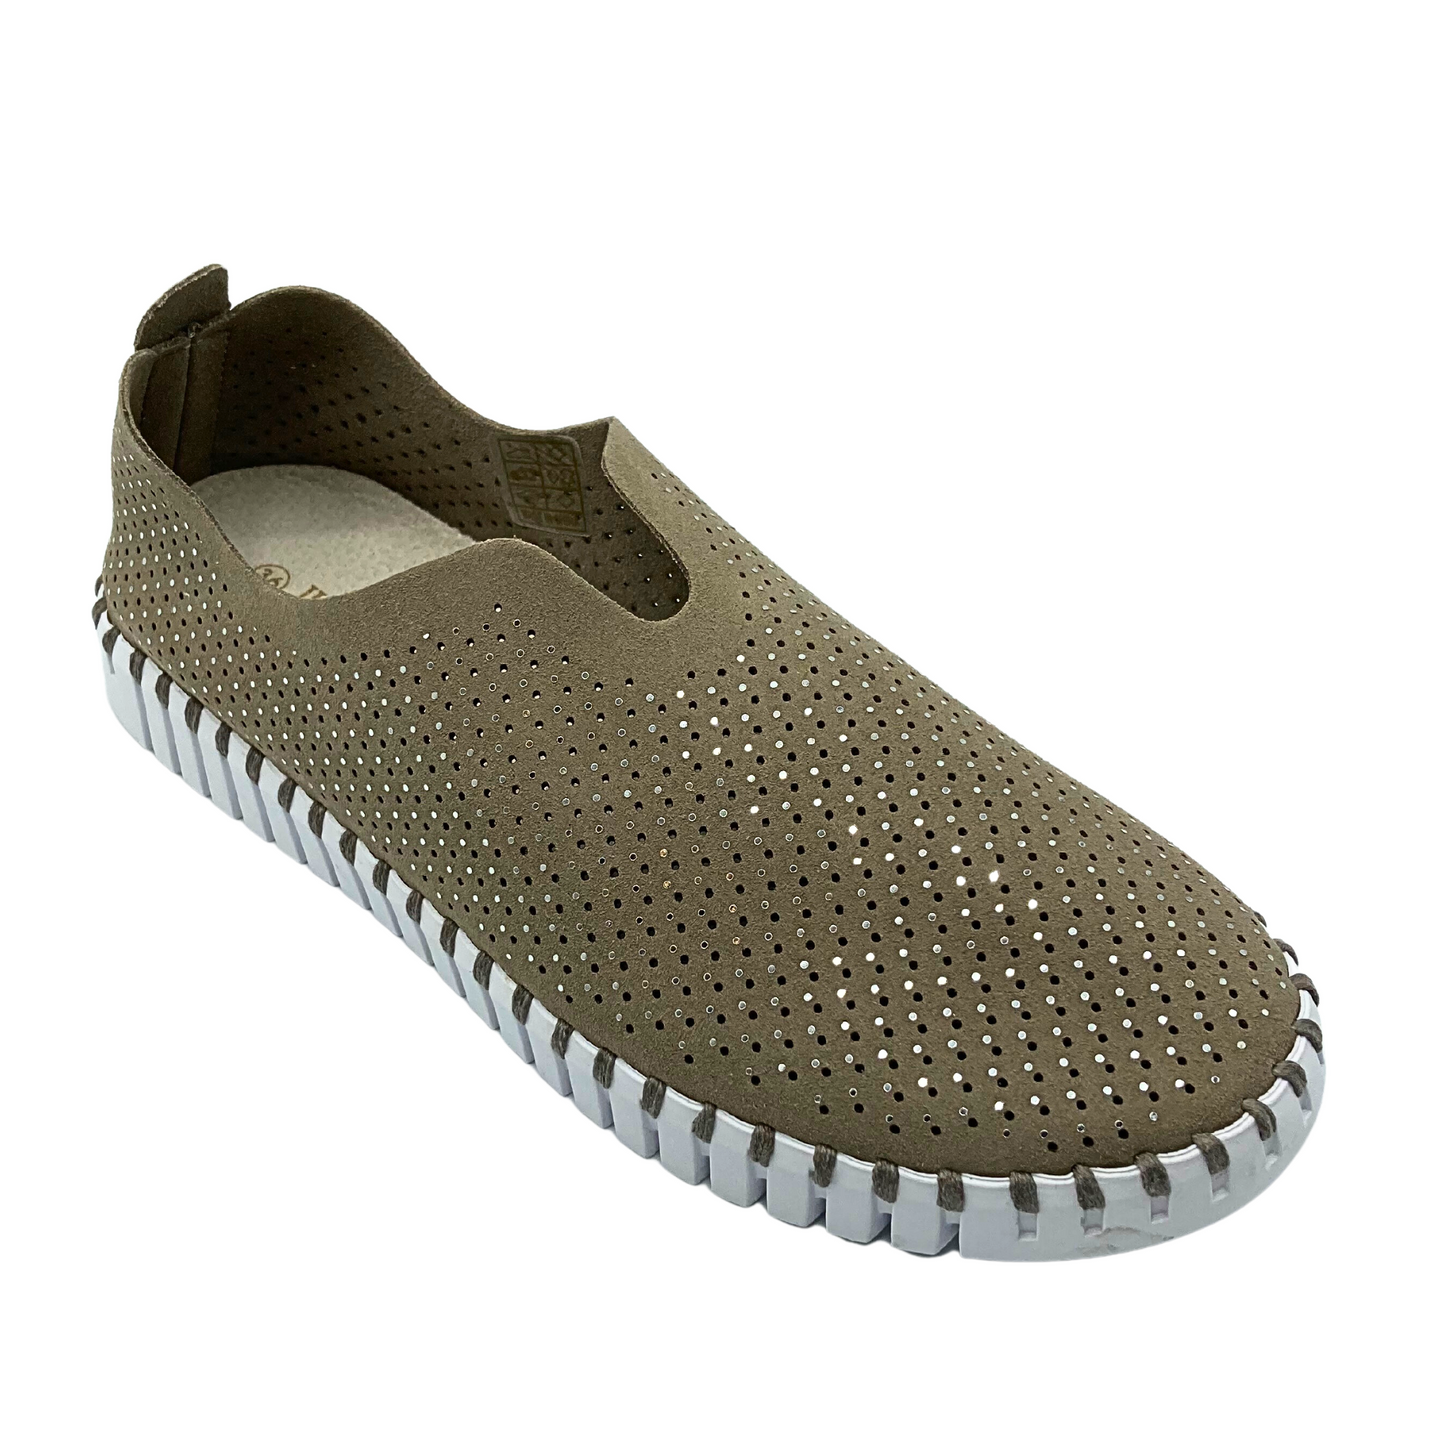 Angled side view of a slip on sneaker made of recycled microfibre.  It has tiny laser holes and crystals throughout and a white sole.  Pictured in a taupe color called Falcon.